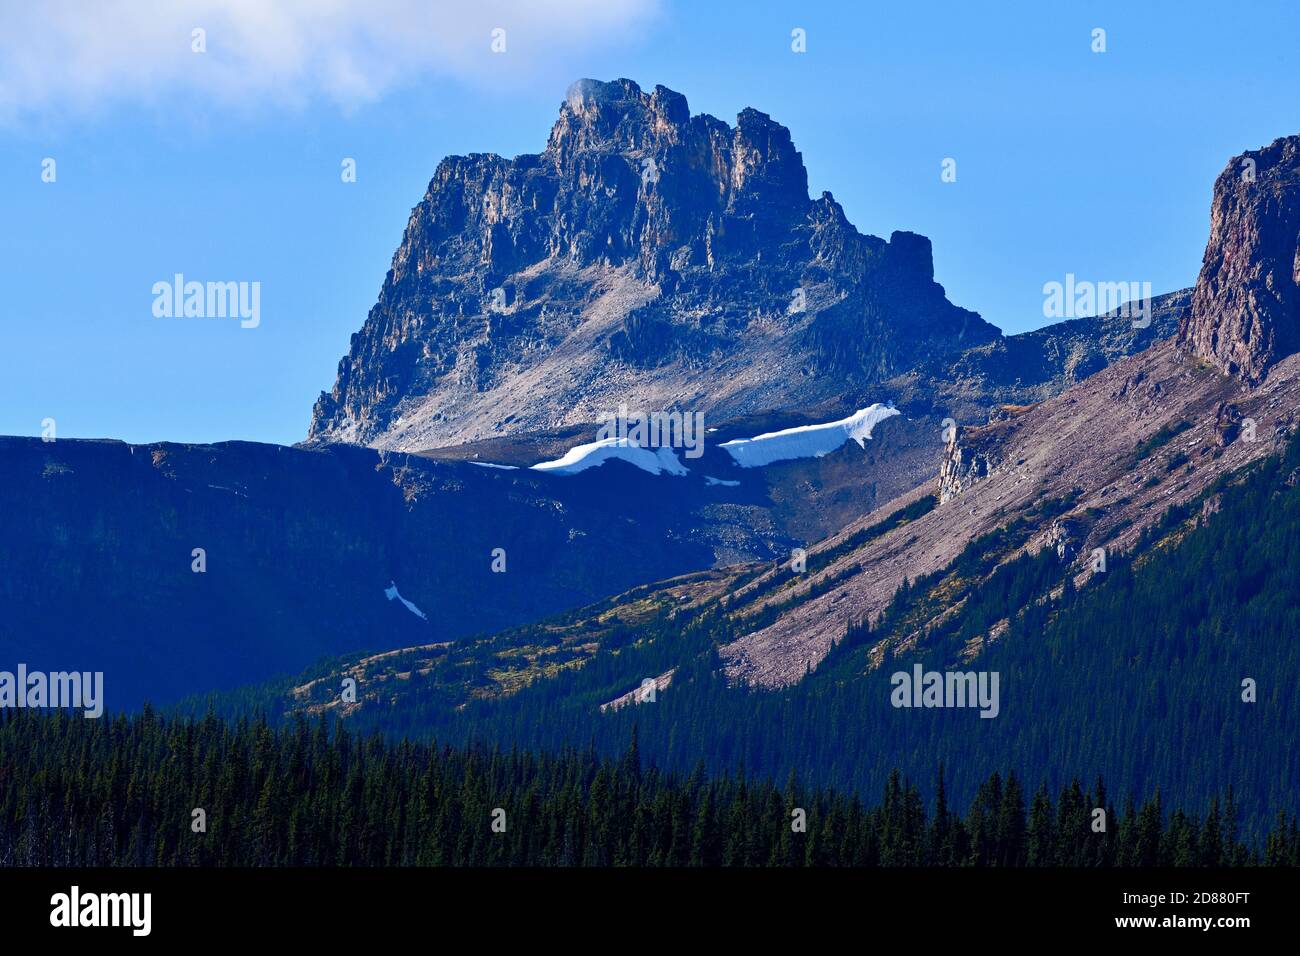 A landscape image of a rocky mountain peak eroded by the elements in Jasper National Park Alberta Canada Stock Photo